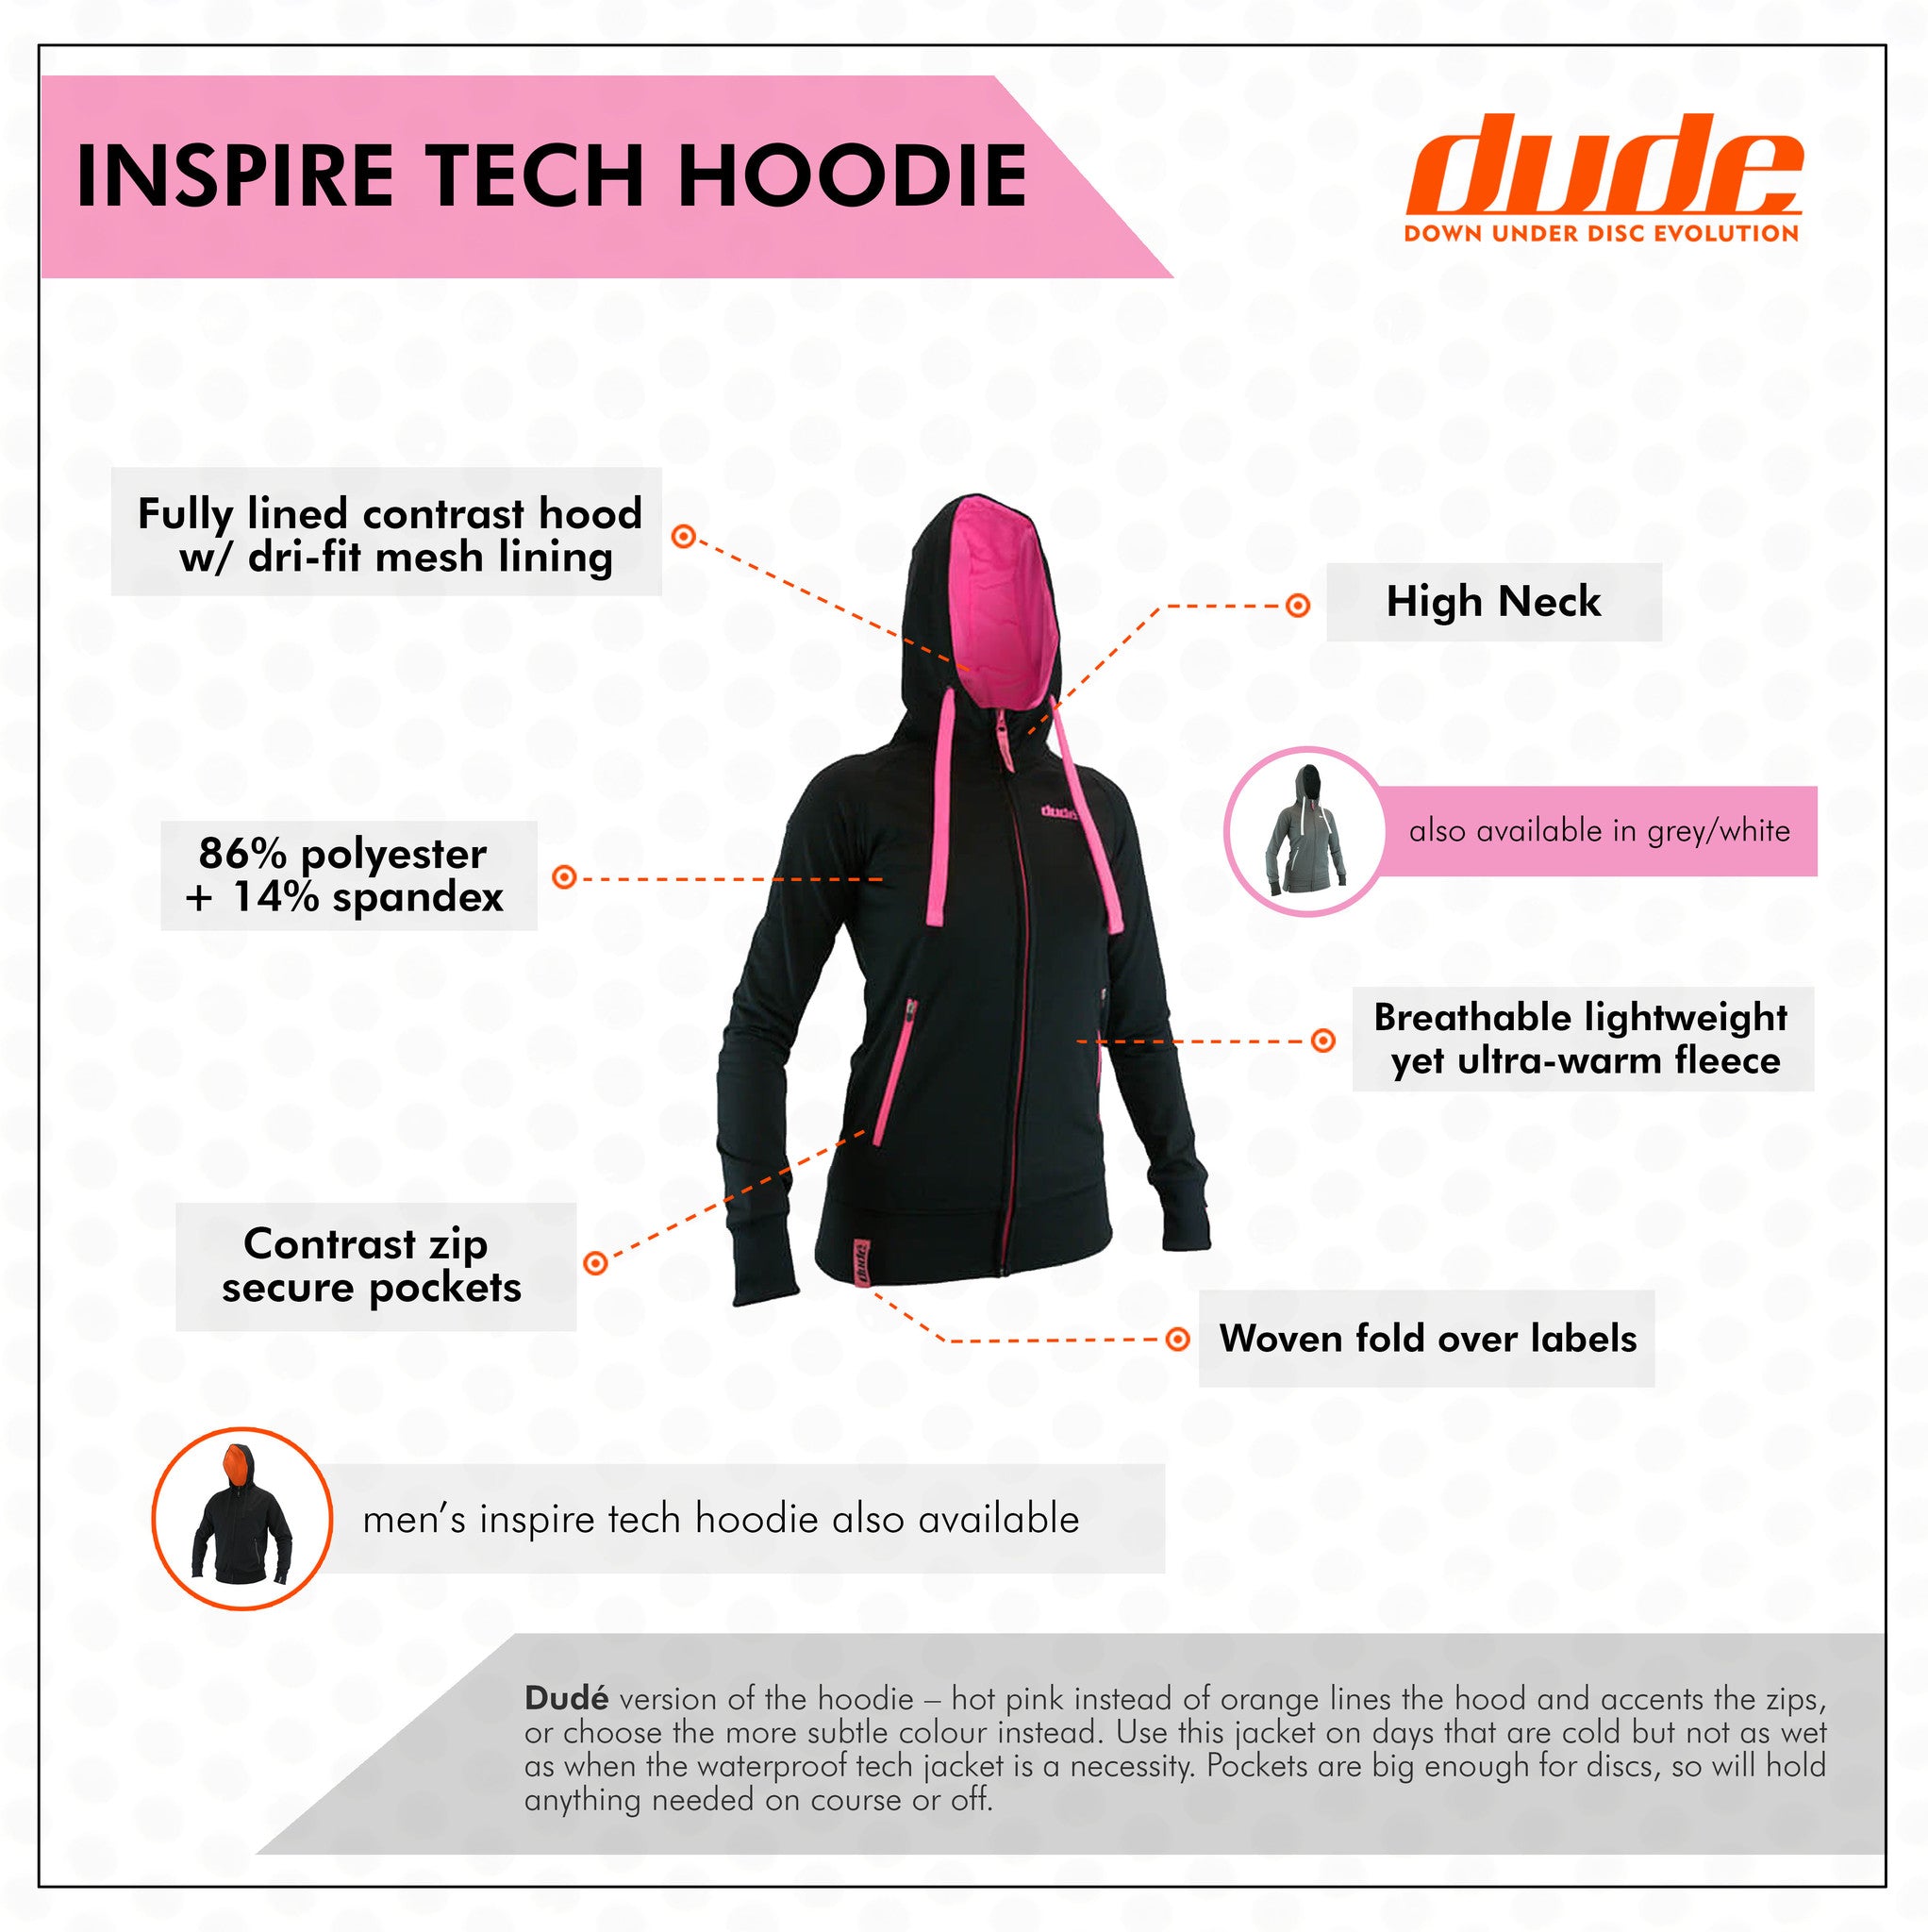 An image showing Ladies Inspire Tech Hoodie with Big pocket  enough for dude discs. 